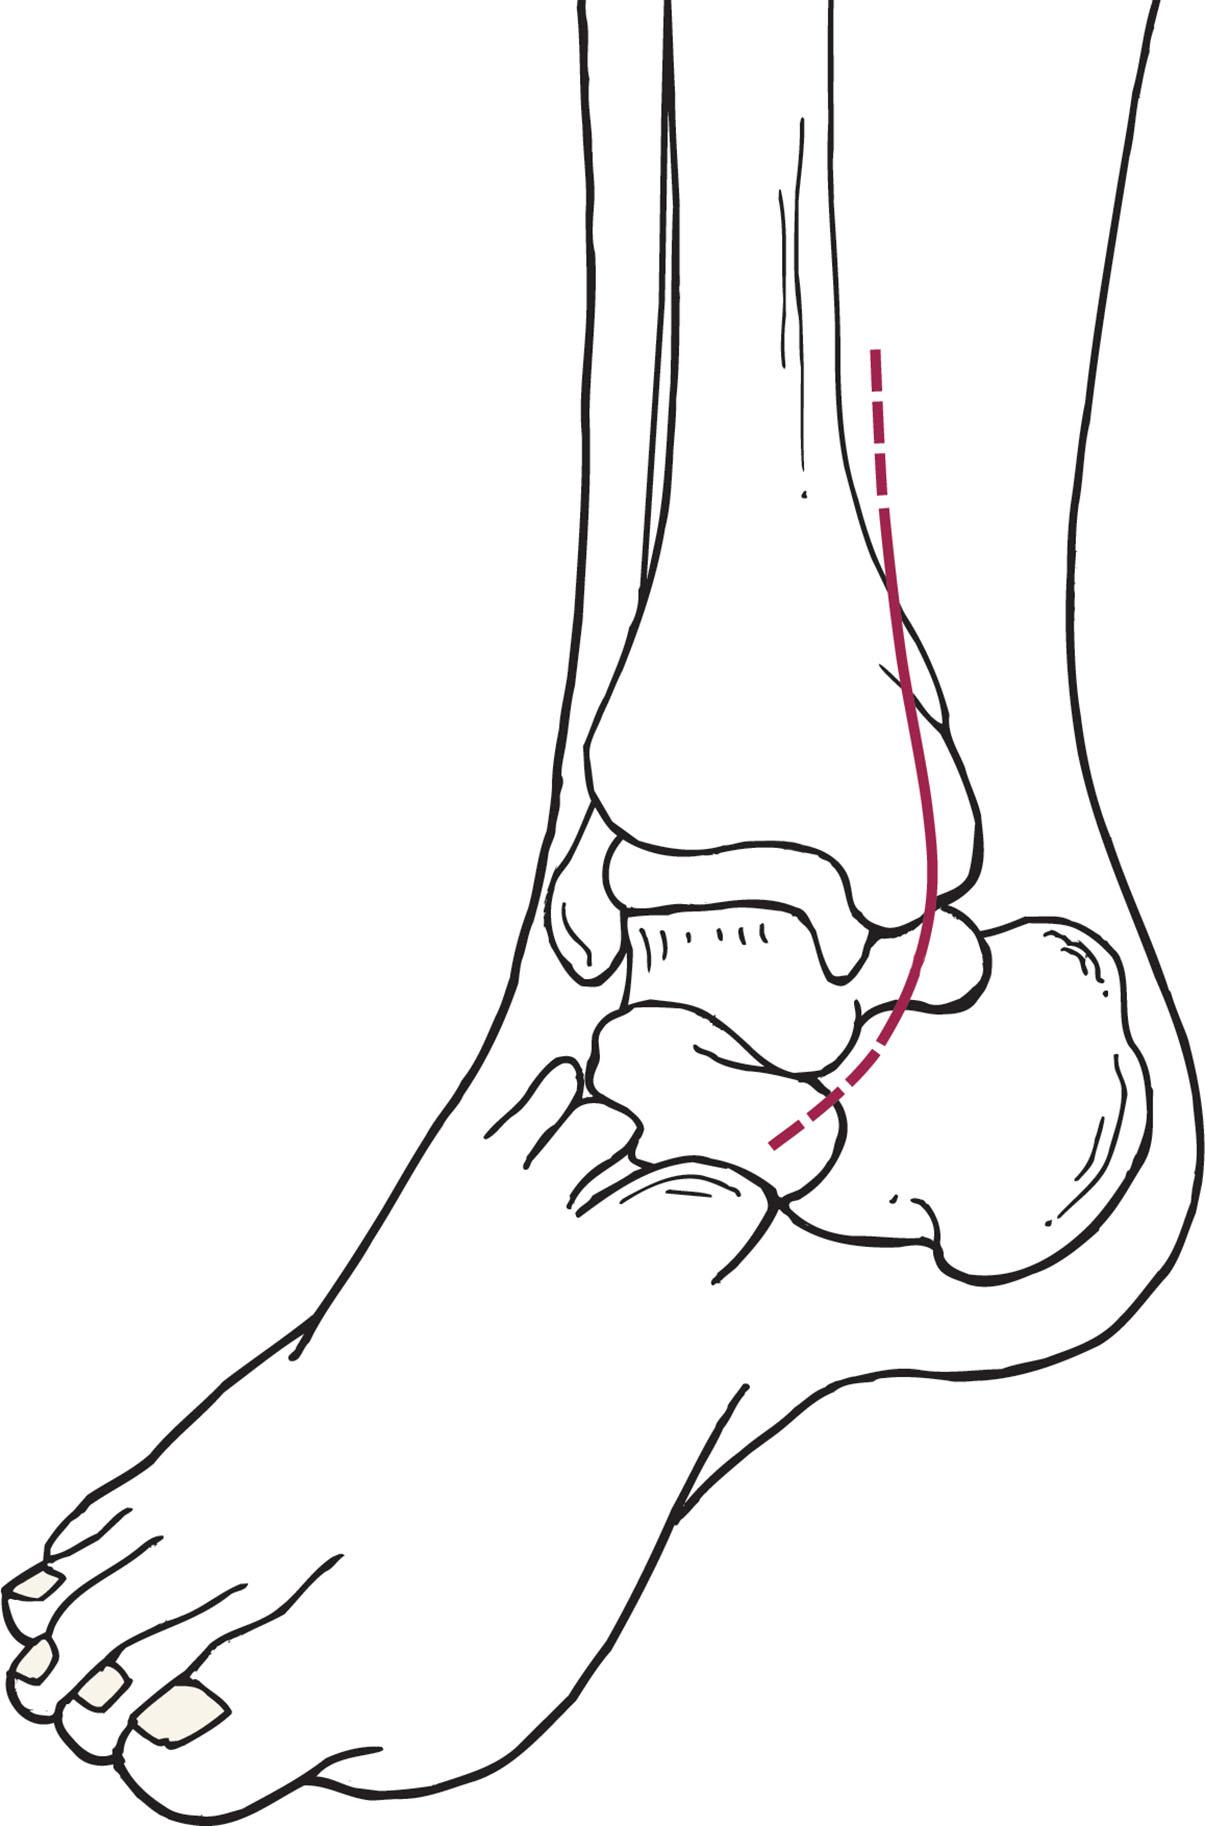 Fig. 44-17, Medial view. The incision runs slightly posterior to the medial malleolus in line with the tibia, curving slightly anteriorly distally to form a gentle J incision. Care must be taken to avoid injury to the saphenous vein and saphenous nerve.